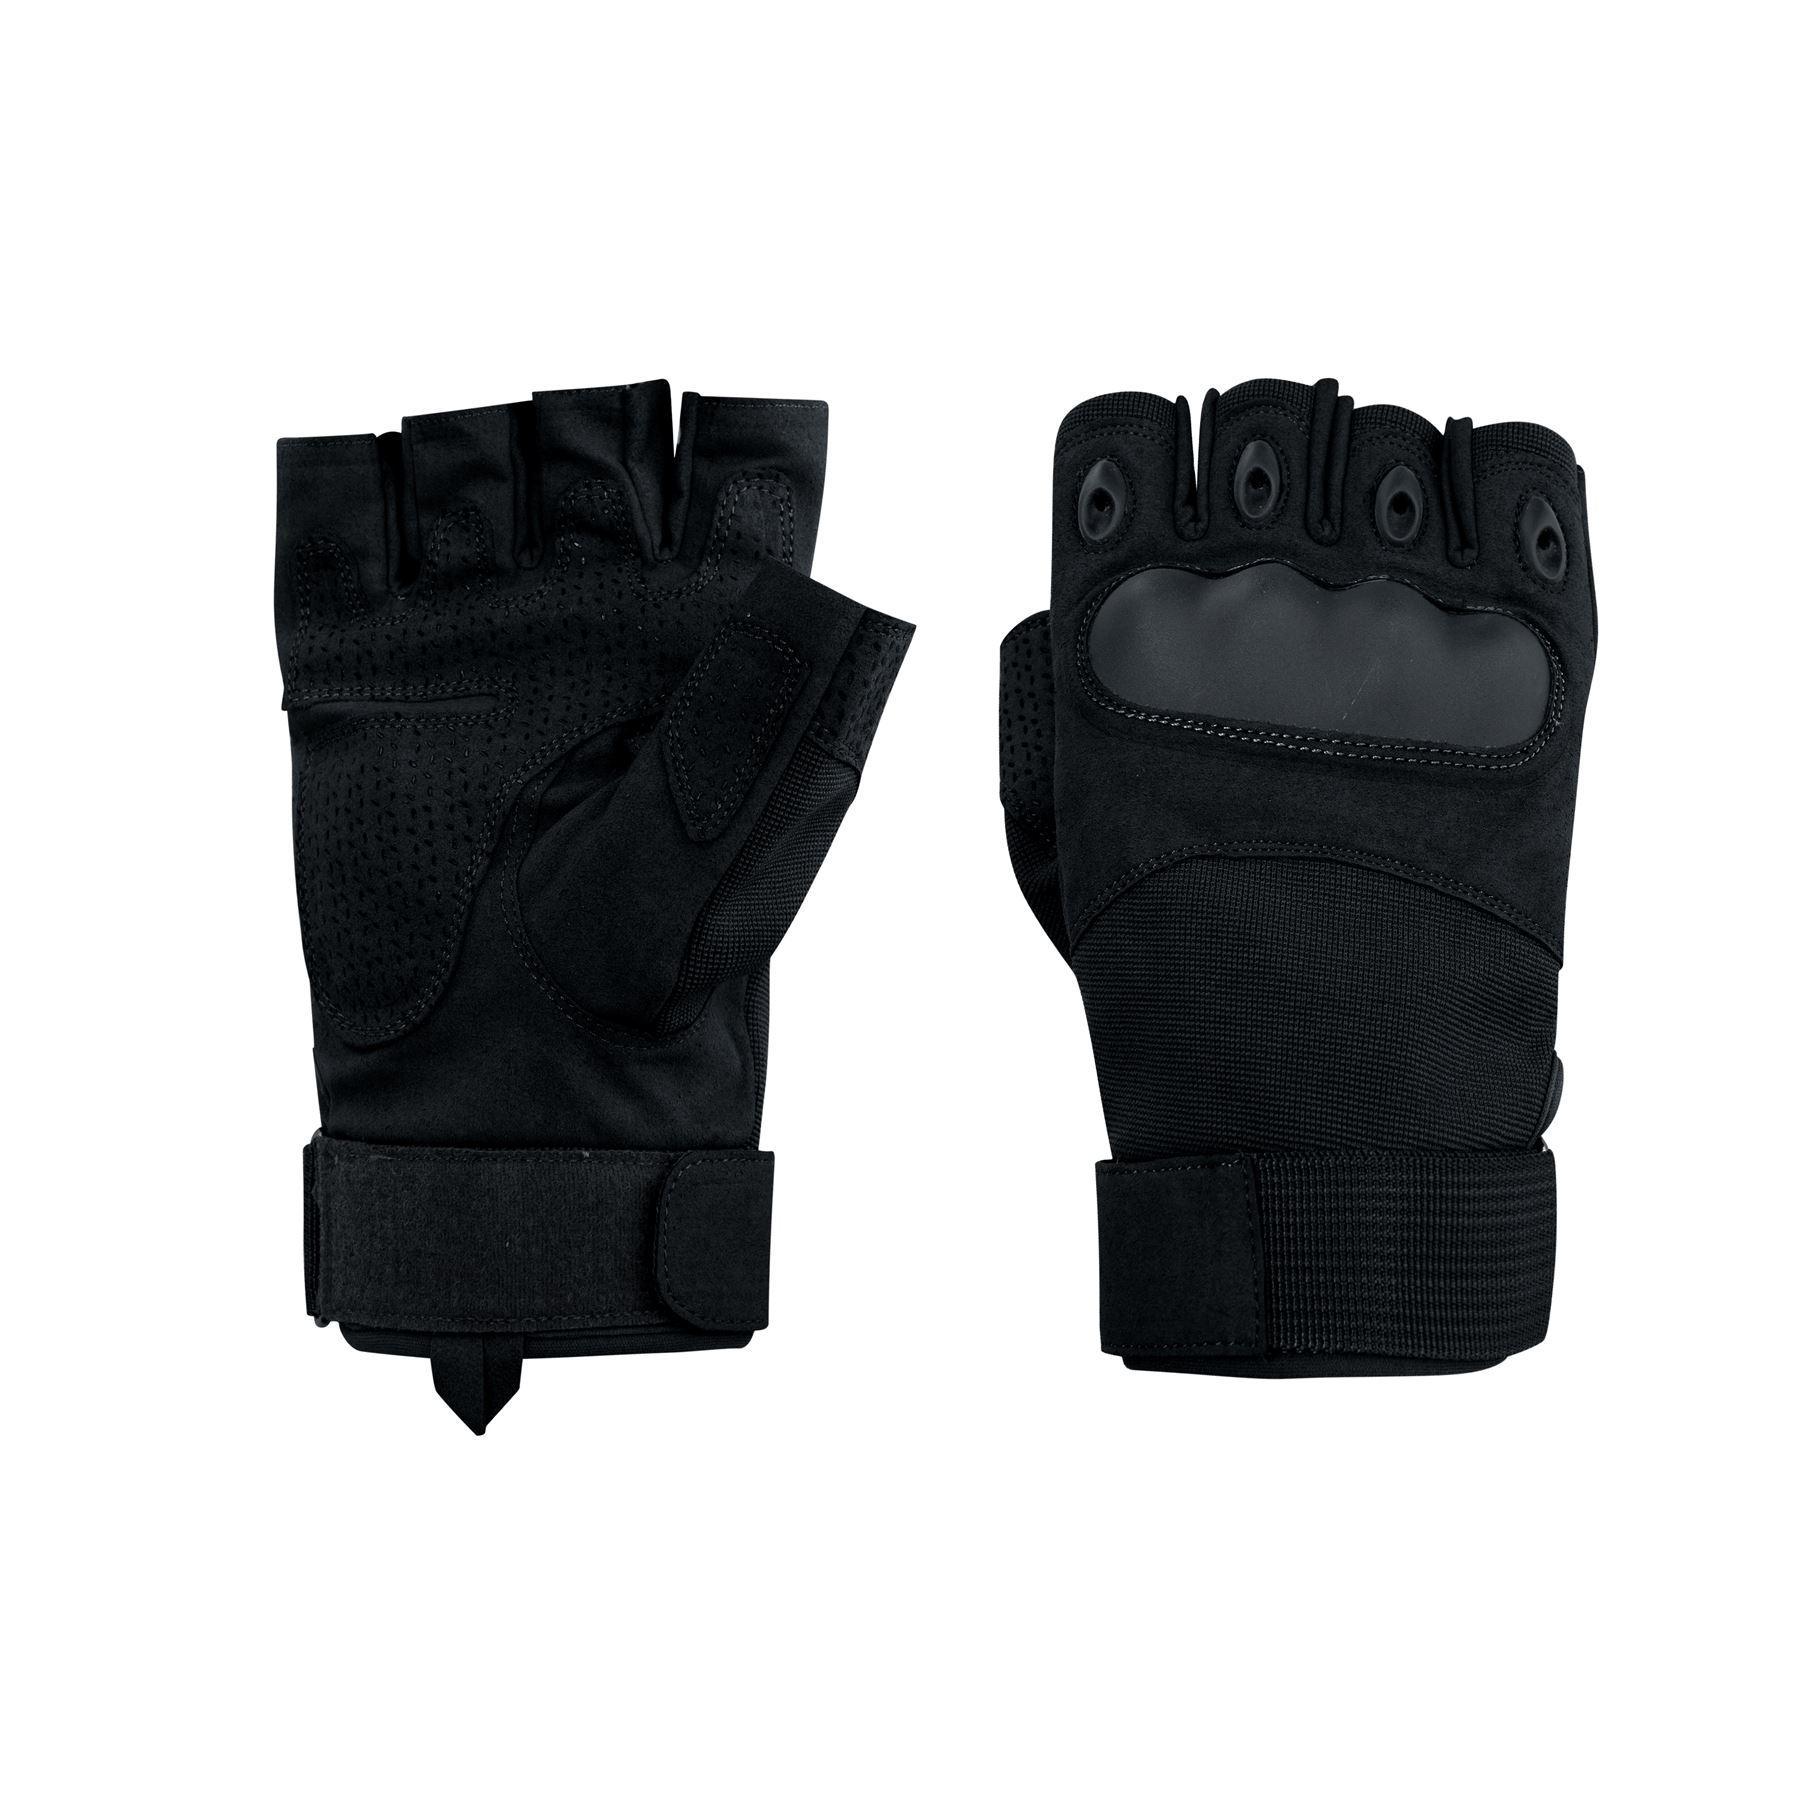 Anti-slip Fingerless Knuckle Guard Outdoor Shooting Sports Gloves